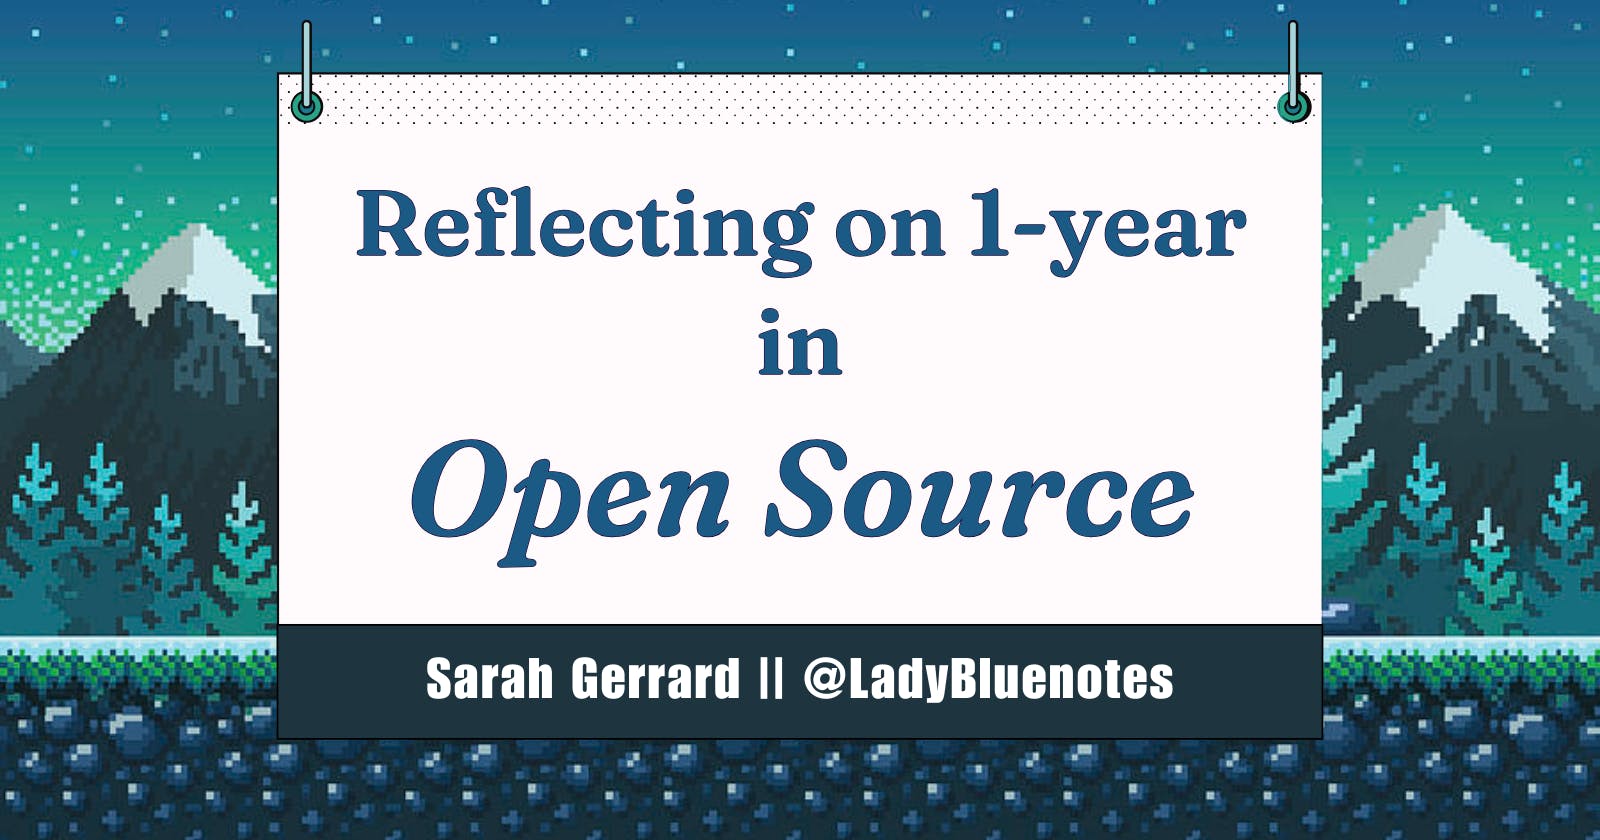 Reflecting on 1-year in Open Source